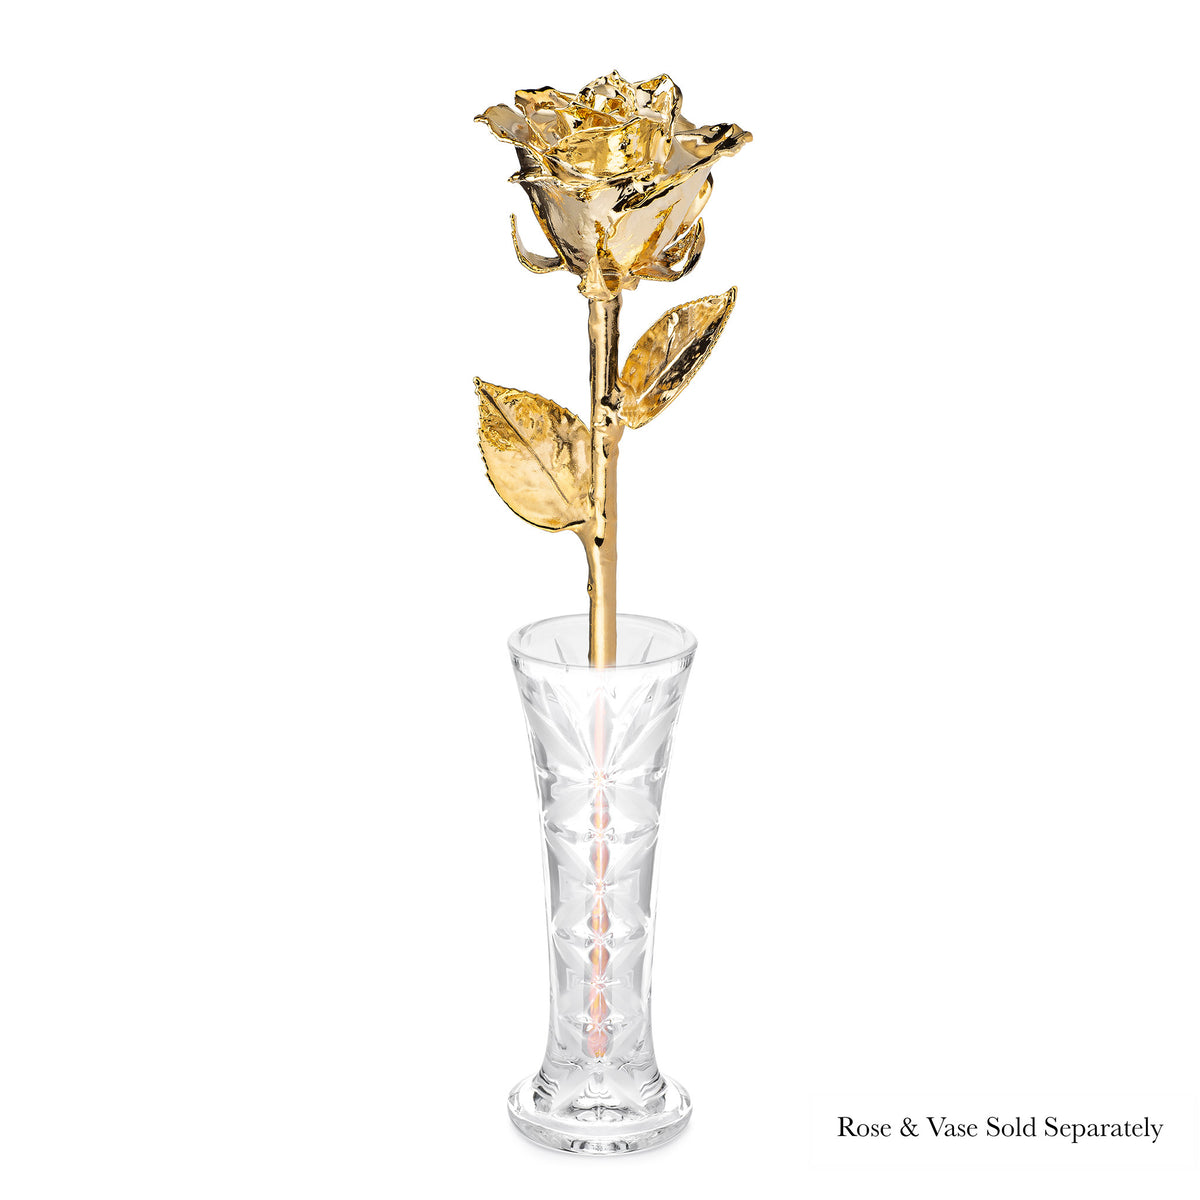 Real 24K Gold Forever Rose. Rose is fully dipped in gold. View shows the rose petals, sepals, stem, and leaves covered in 24 karat gold. The rose is shown in the optional crystal vase.